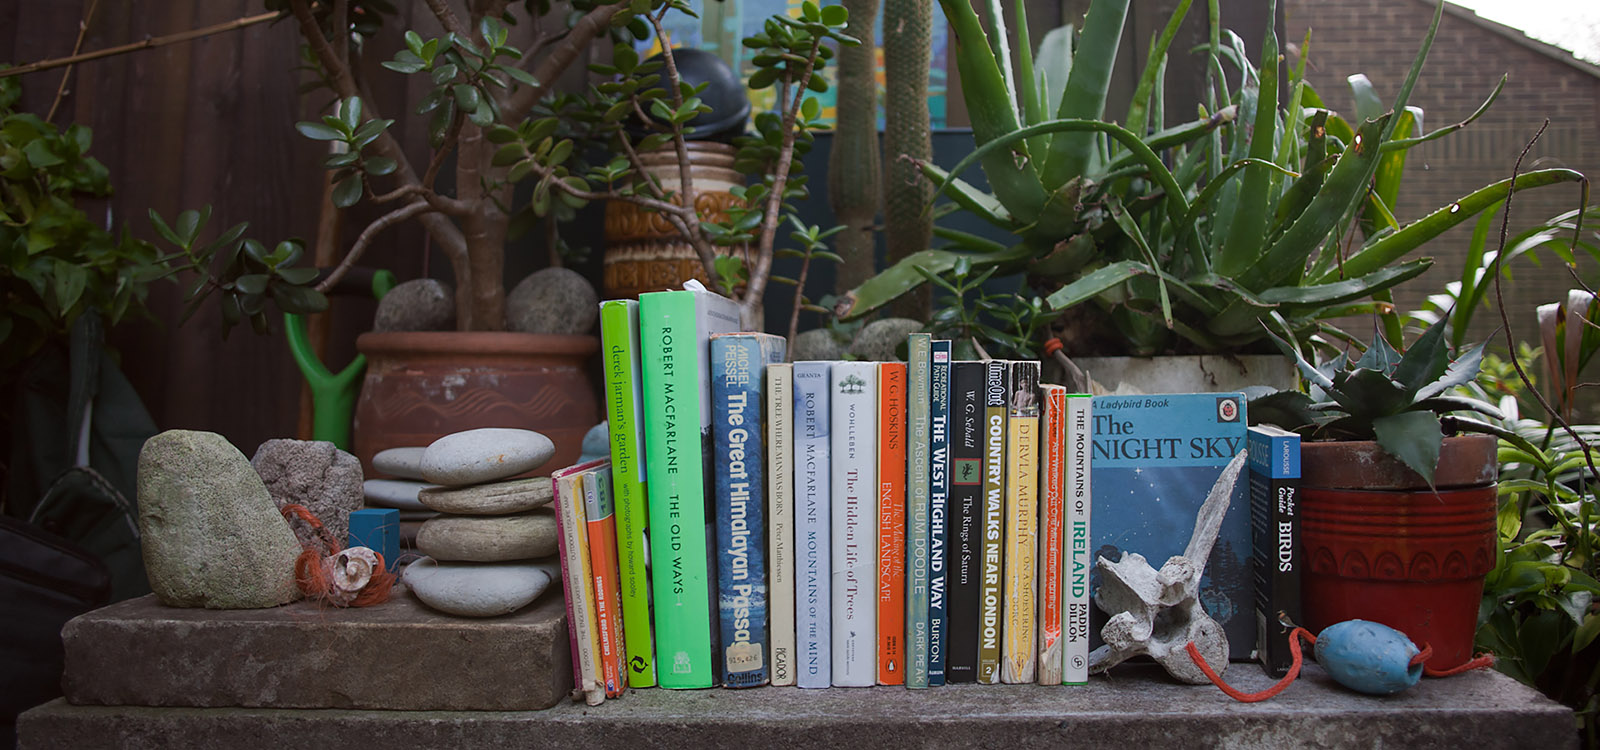 books on a concrete table surrounded by plants and detritus found in the hills and on beaches